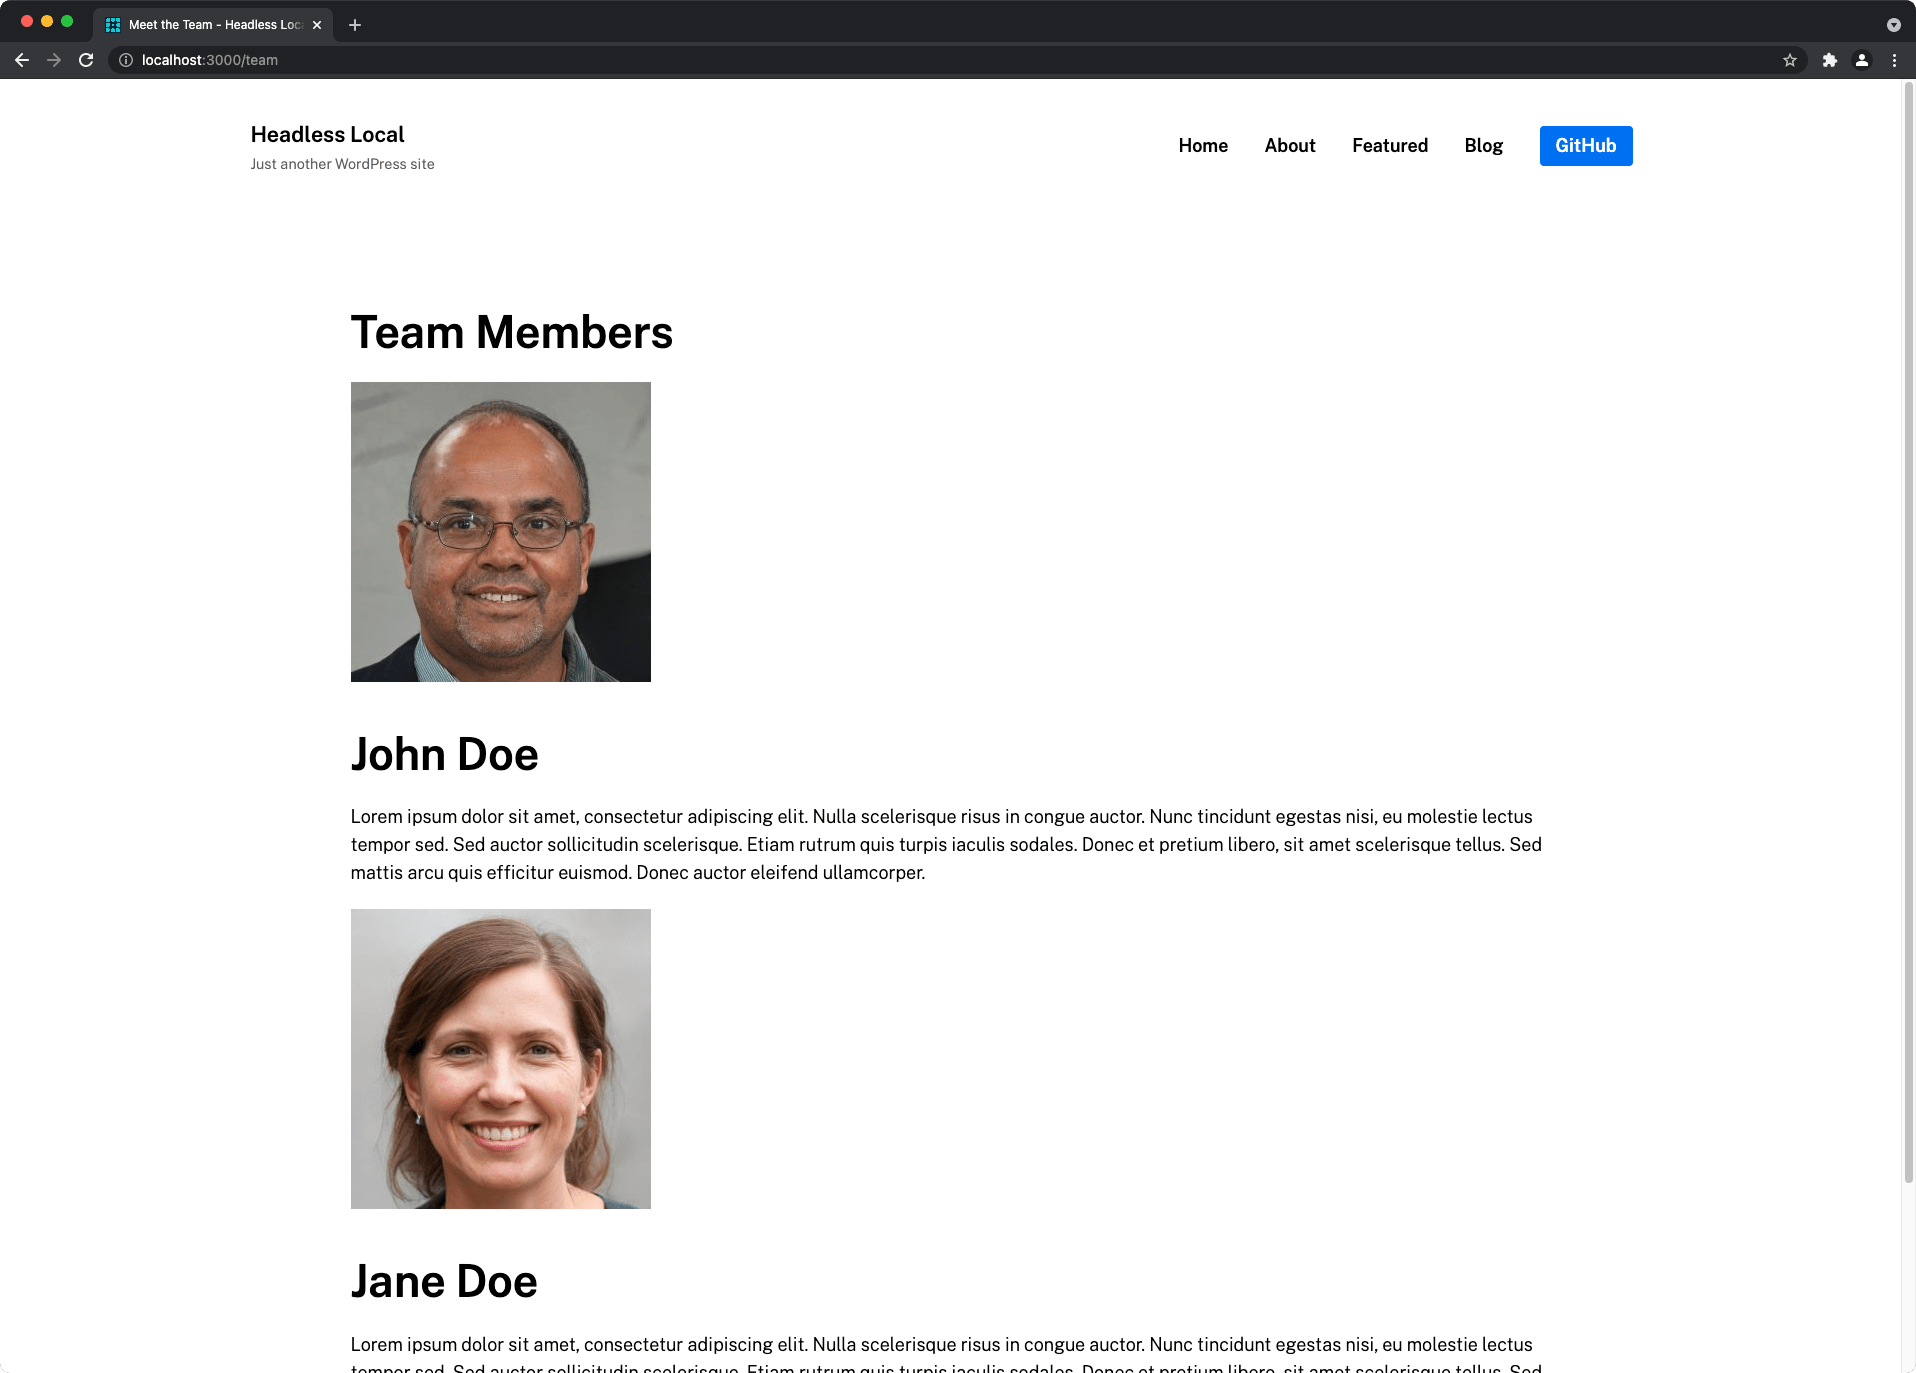 A web page with a list of team members